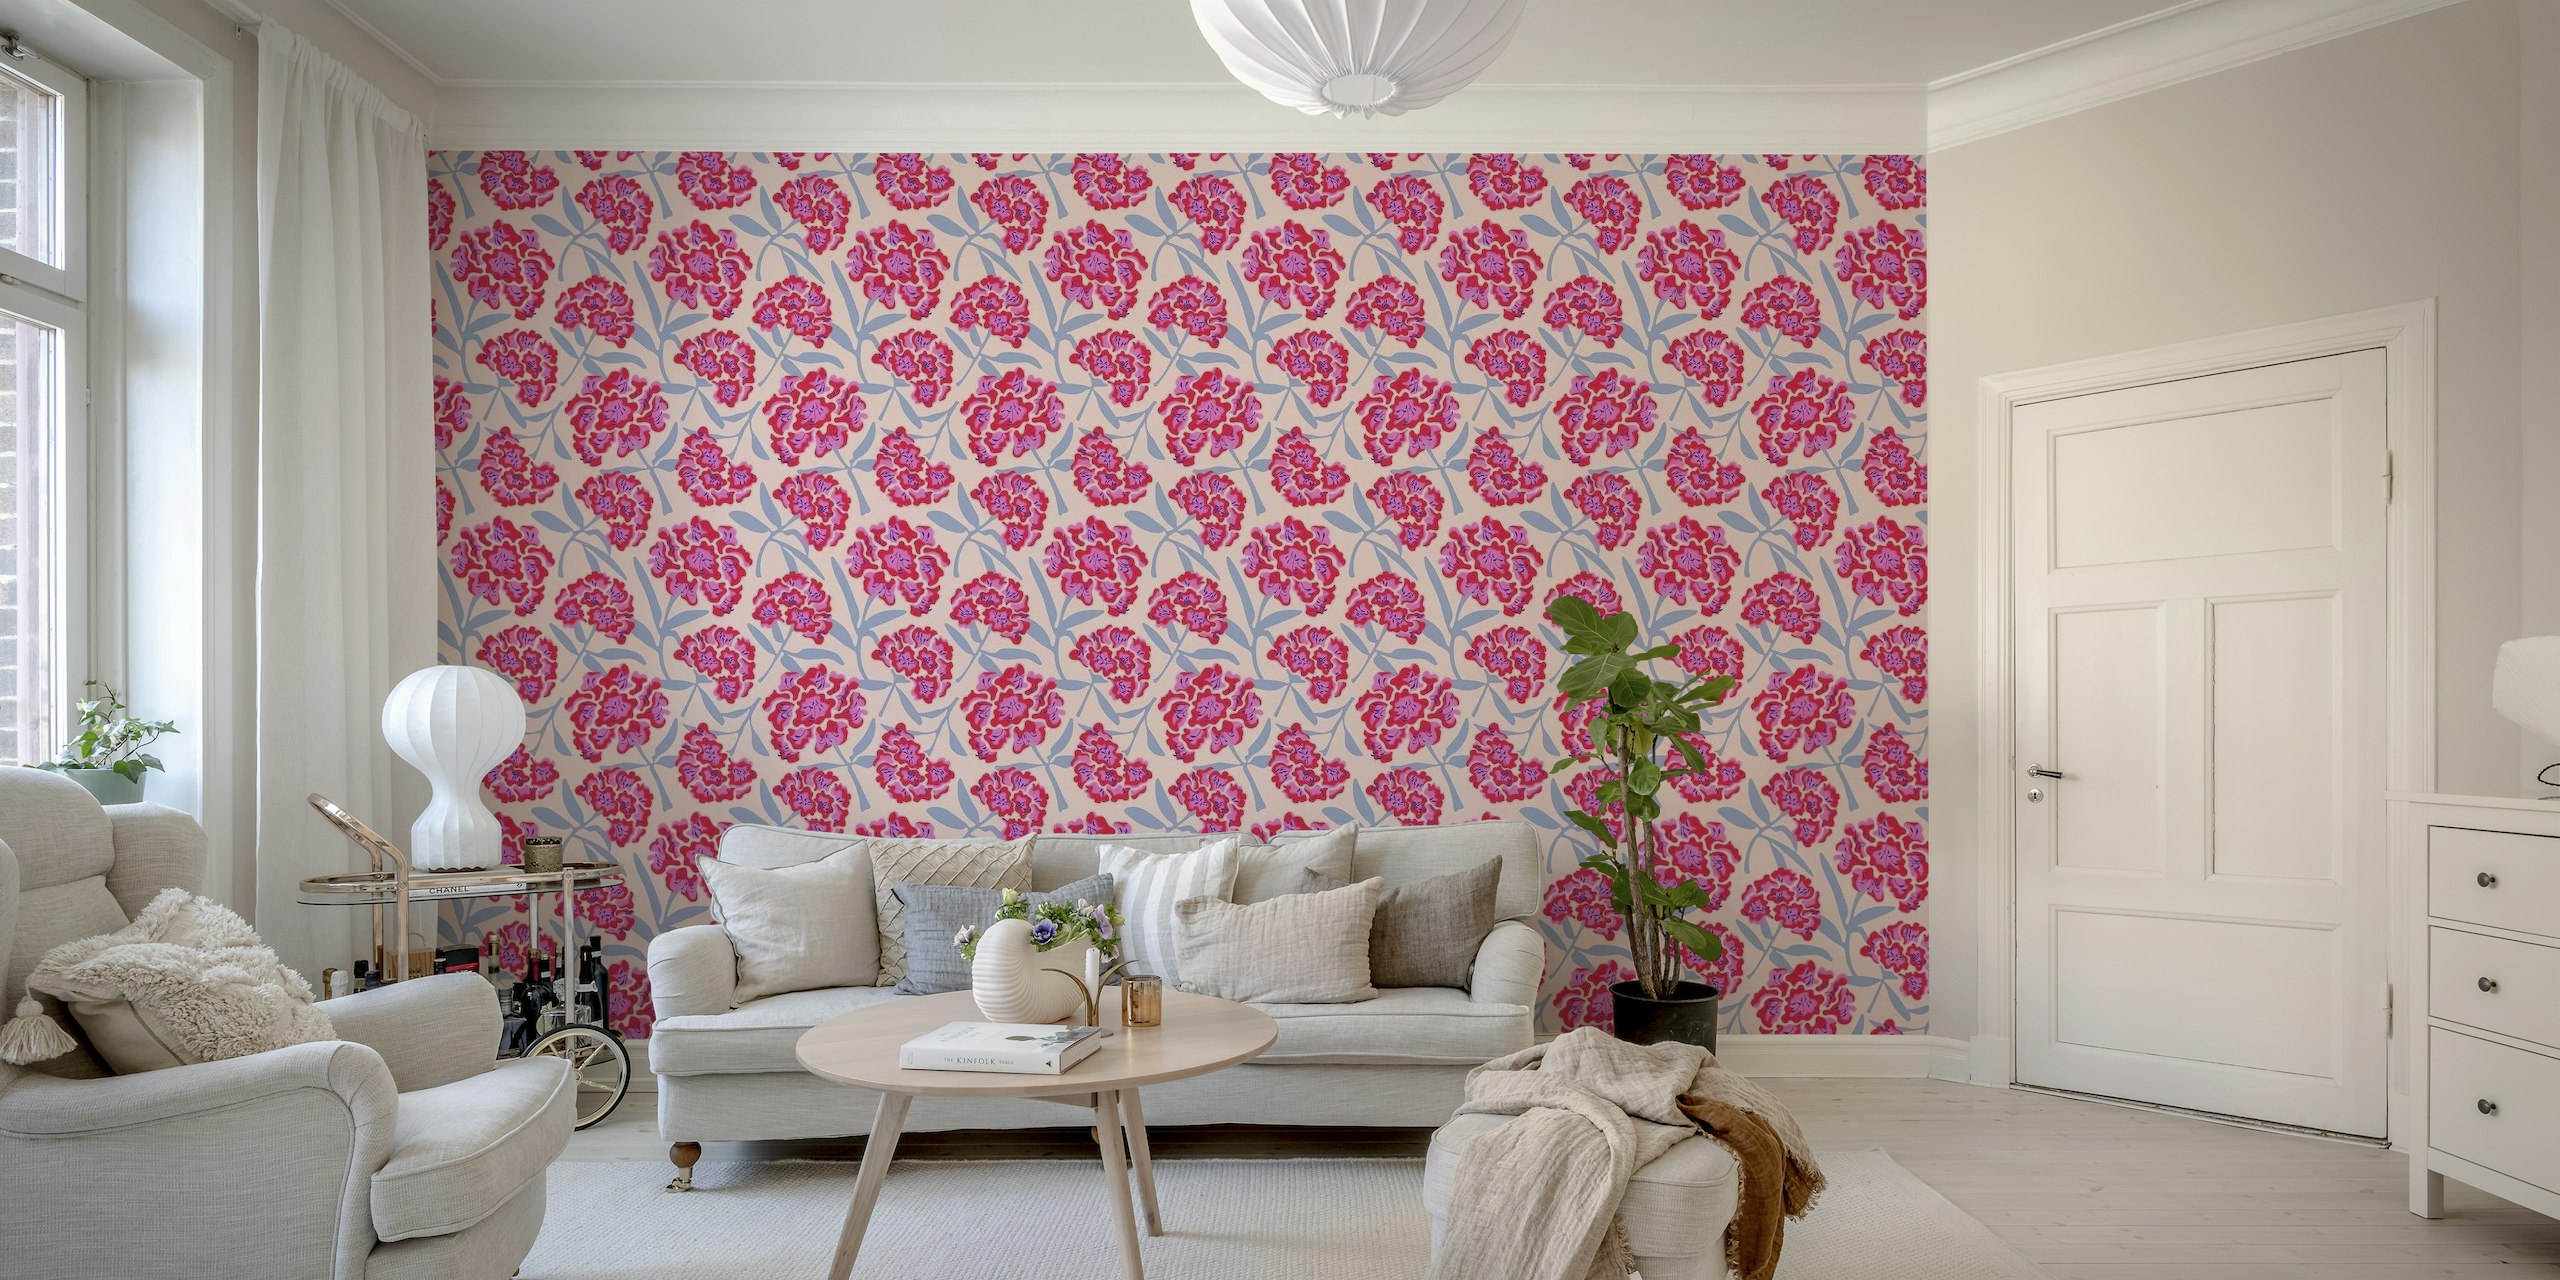 RHODODENDRONS Retro Floral Fuchsia Pink Large papel pintado